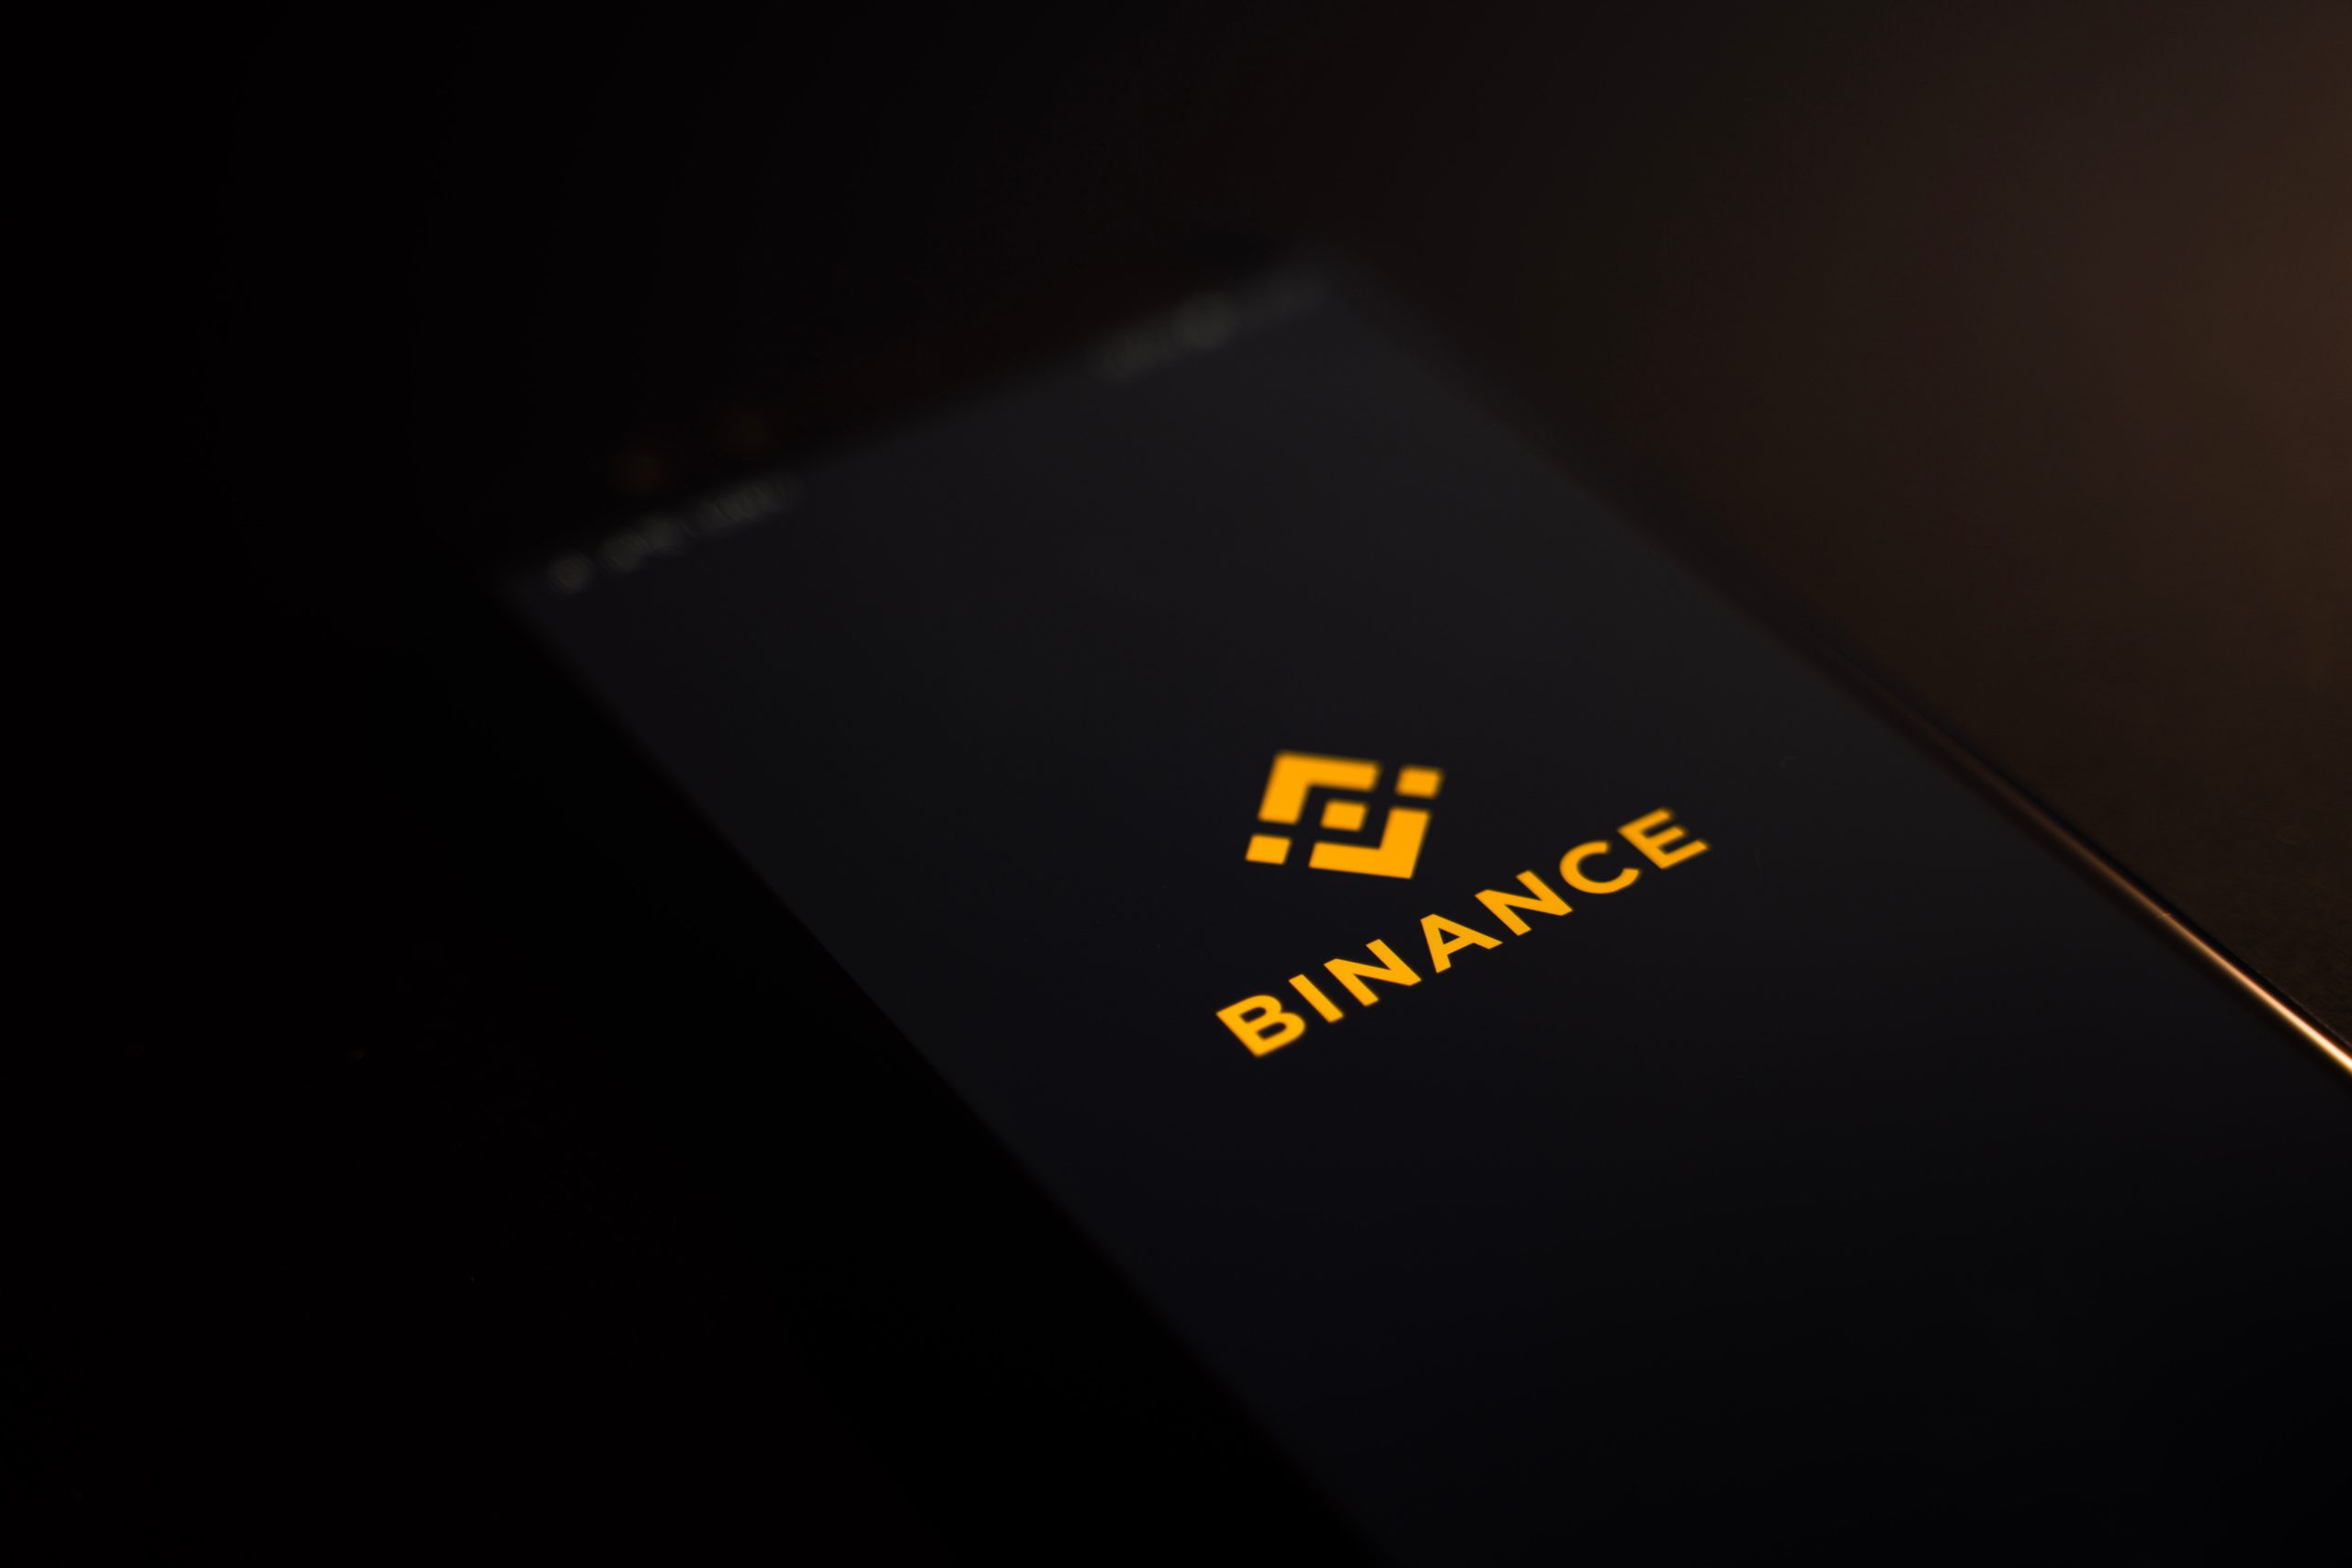 As crypto traders struggle to sue Binance, the legal ramifications of exchange outages remain unclear